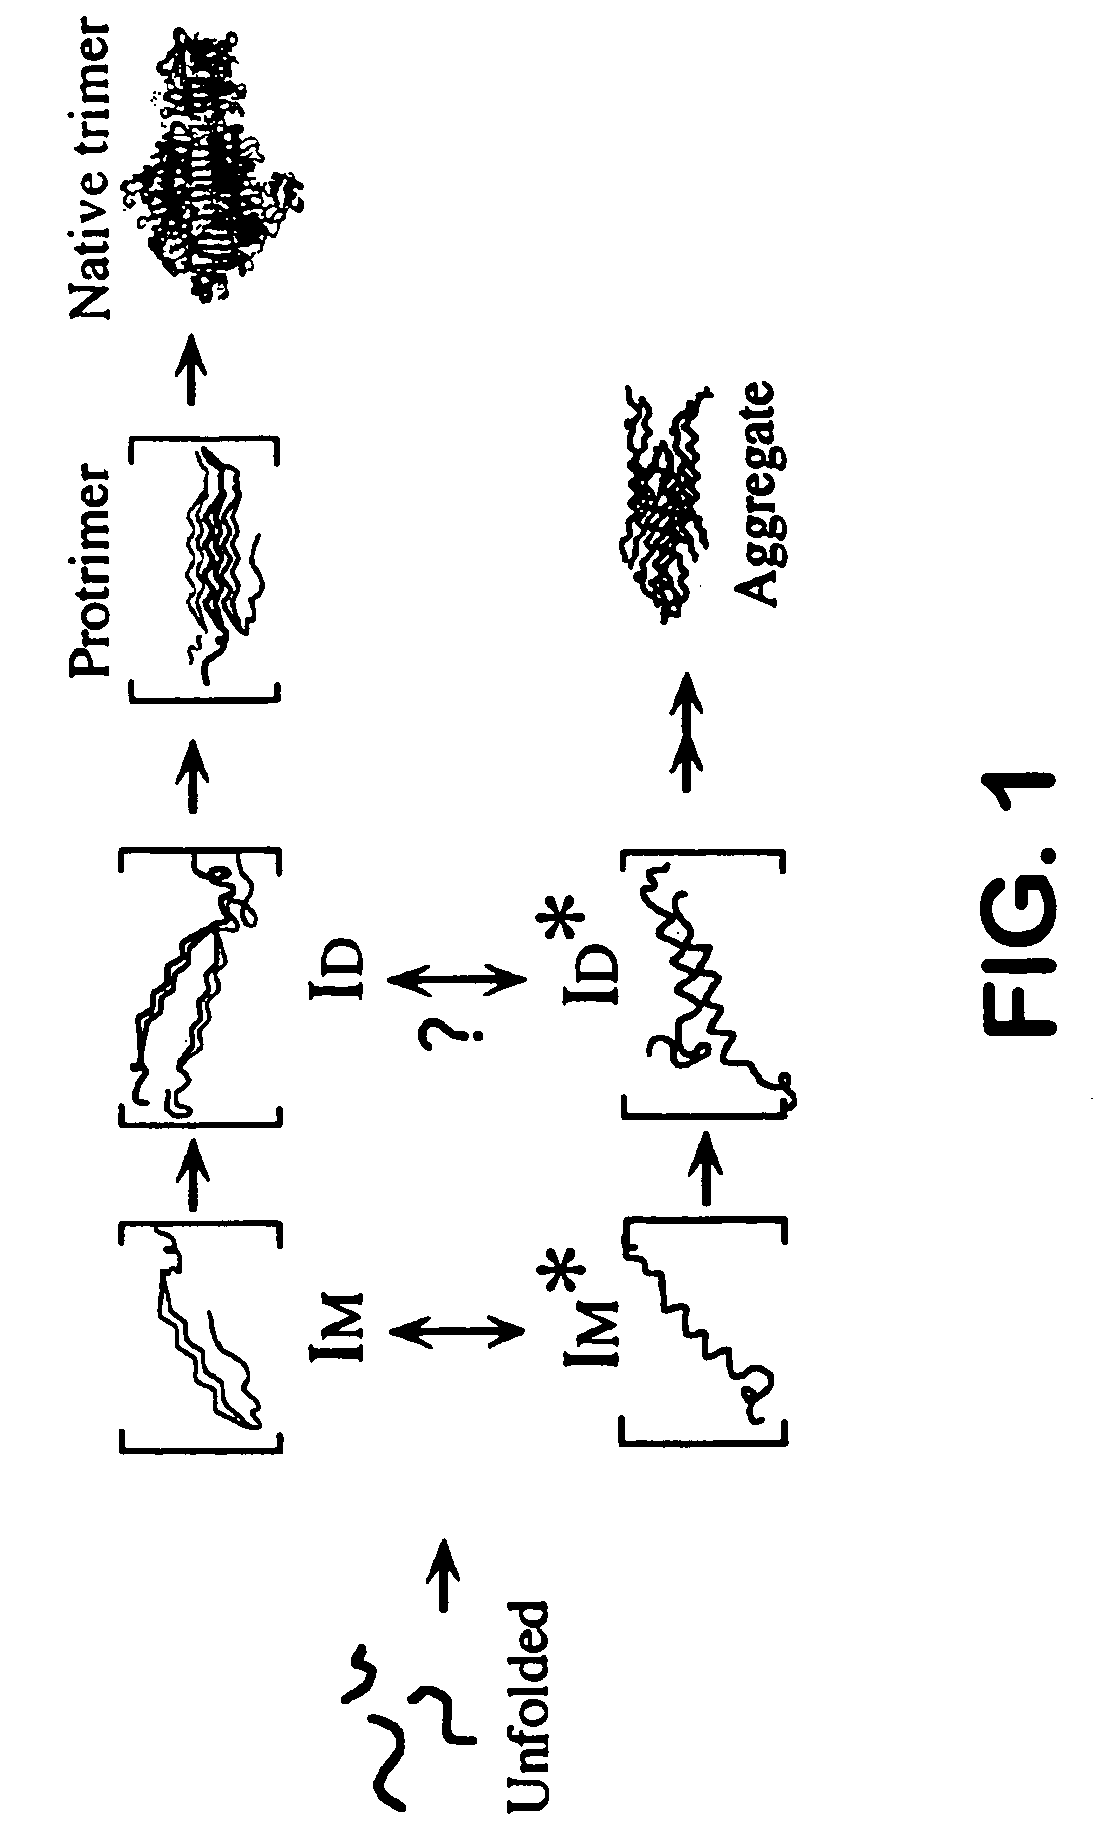 Use of hydrostatic pressure to inhibit and reverse protein aggregation and facilitate protein refolding